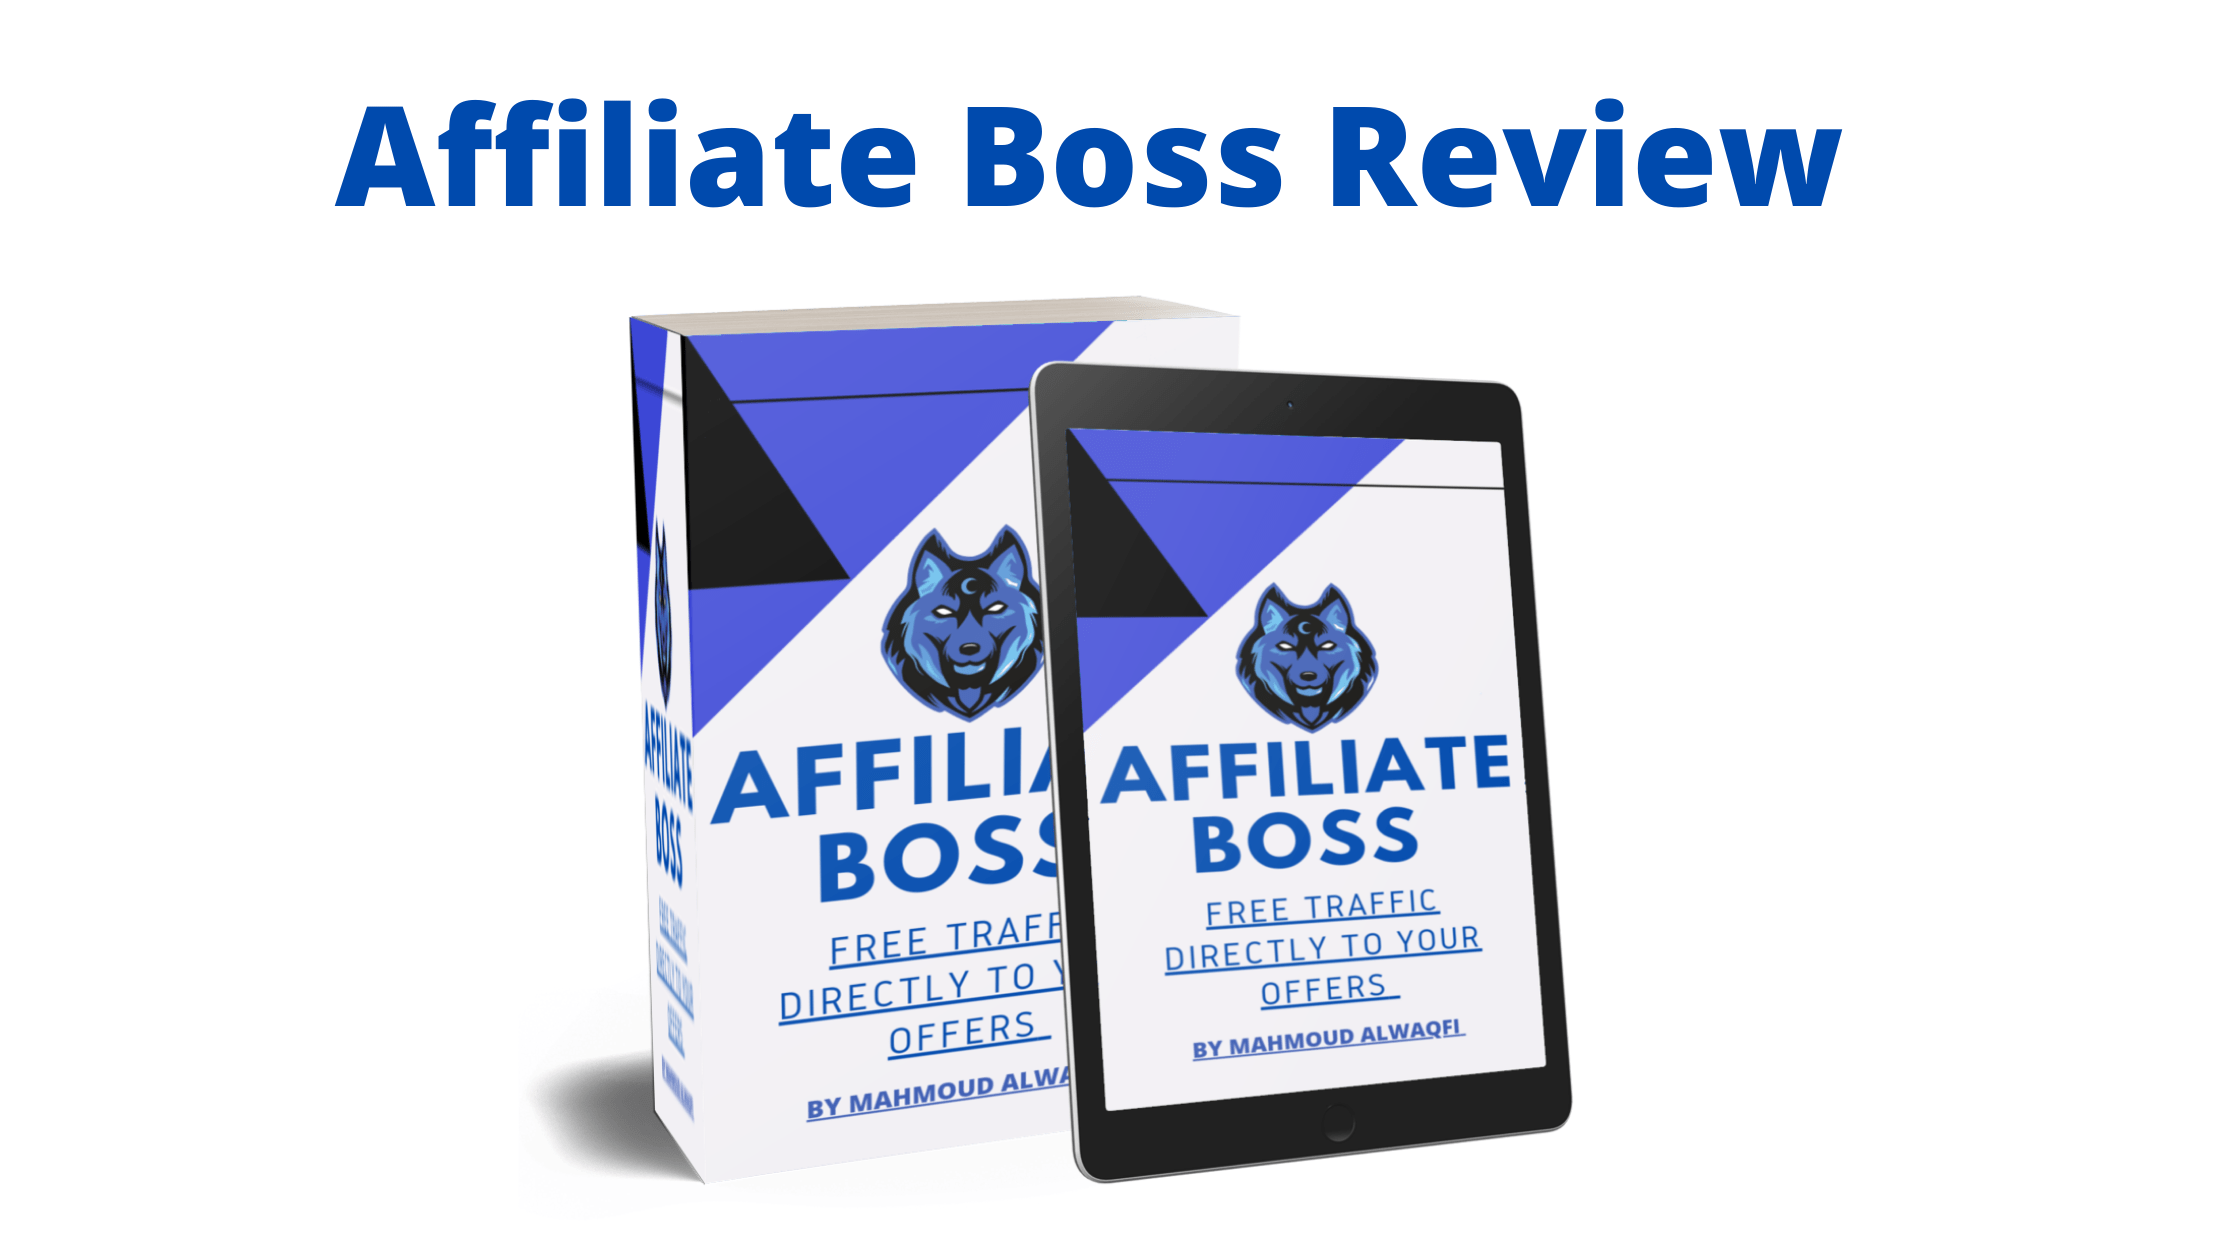 Affiliate Boss Review